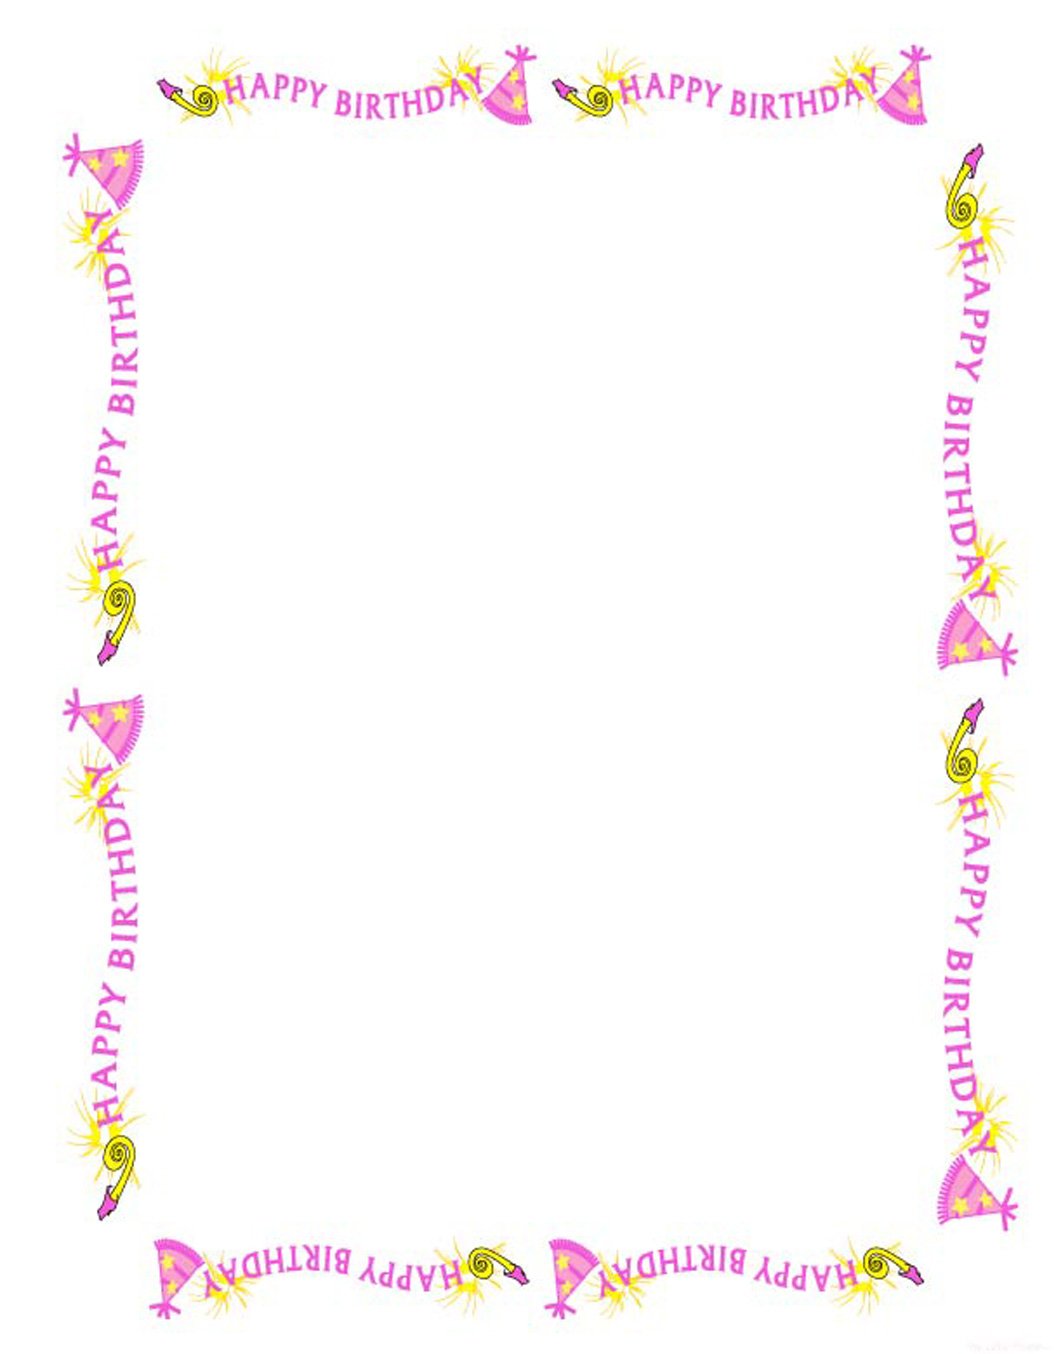 Birthday Border Clipart Borders And Frames Clipart